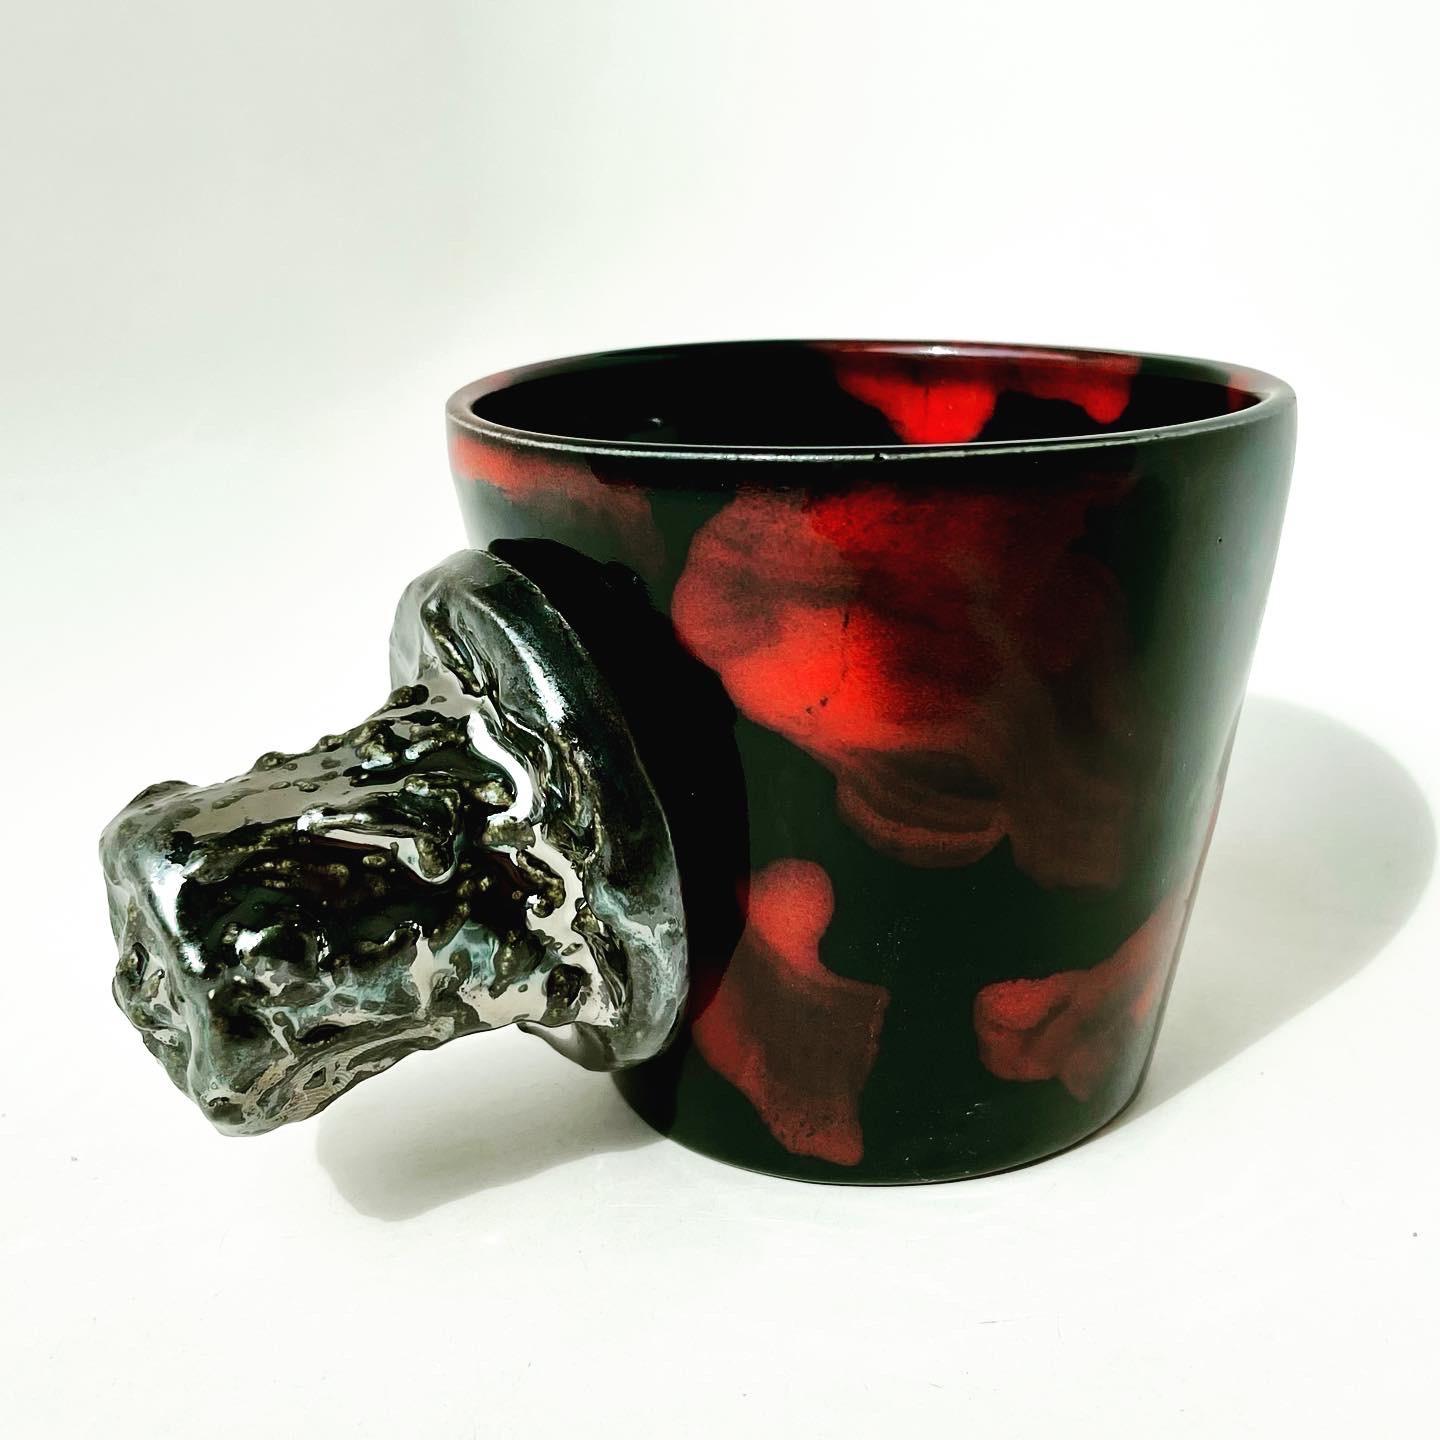 La Lava V, shown here in Diffused China Red/Raven and Broken Silver, the food safe vessel for your favorite beverage of choice, entertaining, or as a decorative object or object d'art. Versatile, sustainable and one of kind, made of recycled